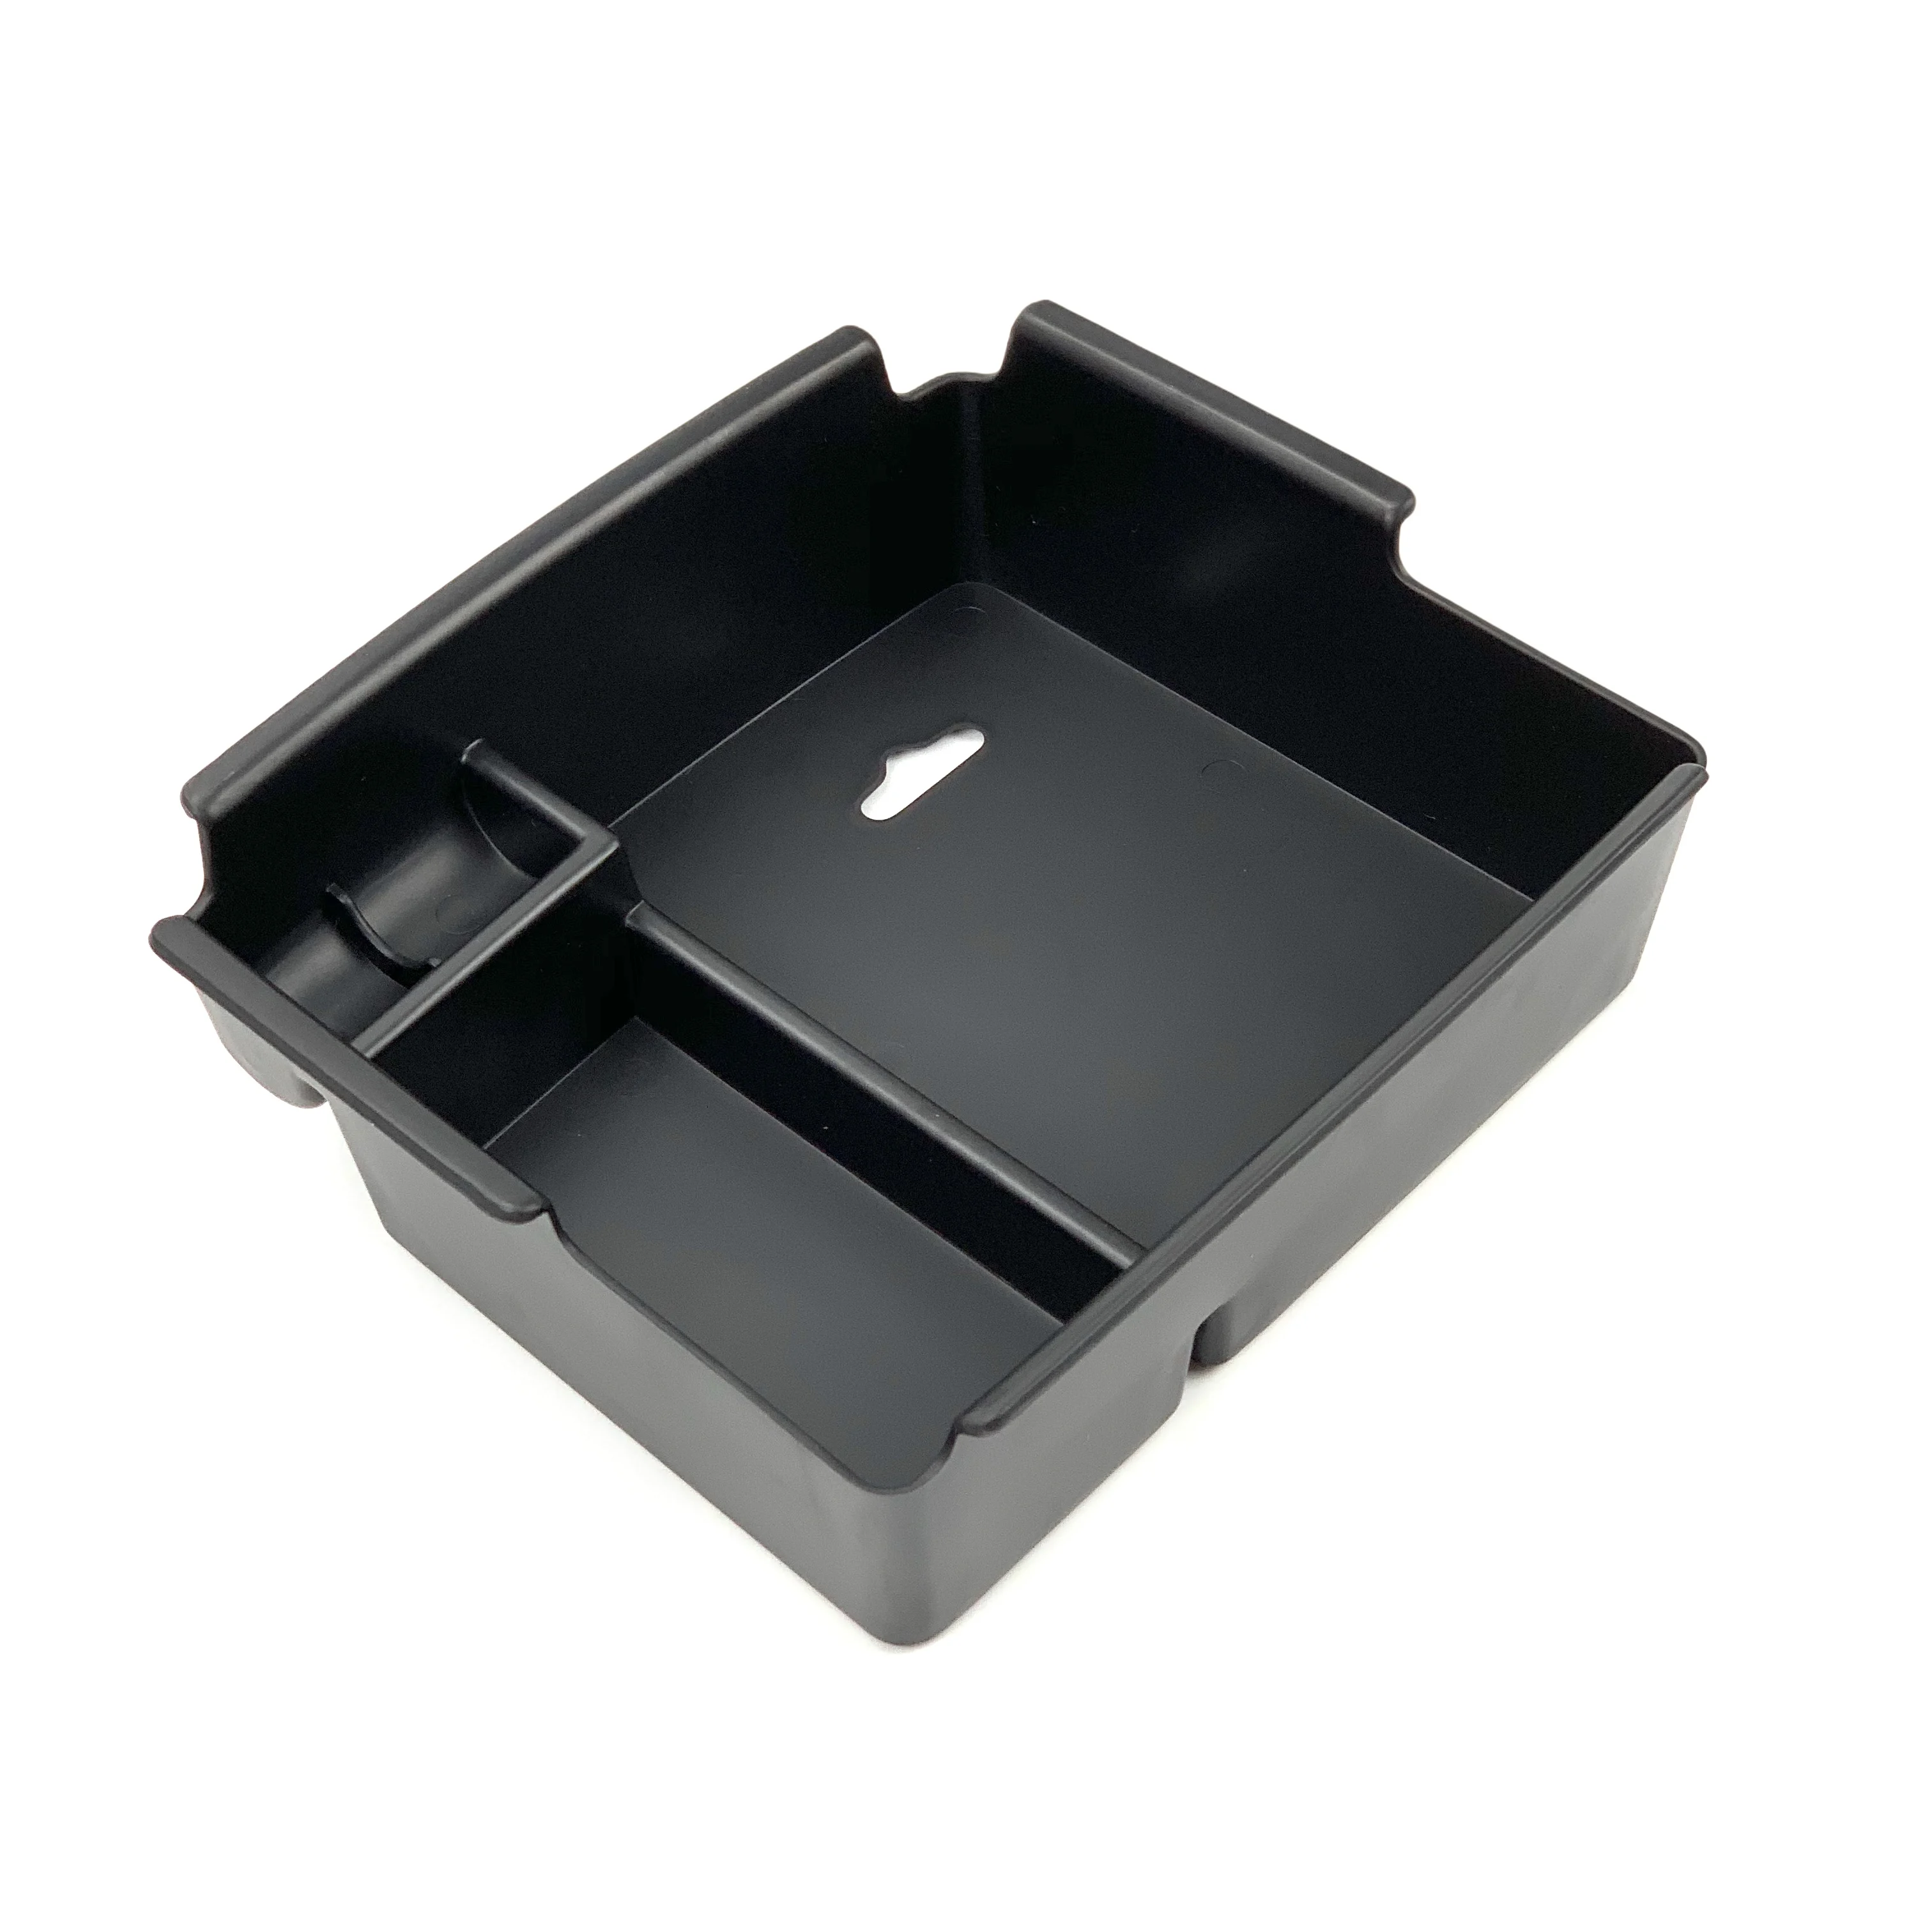  accessories armrest storage box central console organzier stowing tidying storage coin thumb200